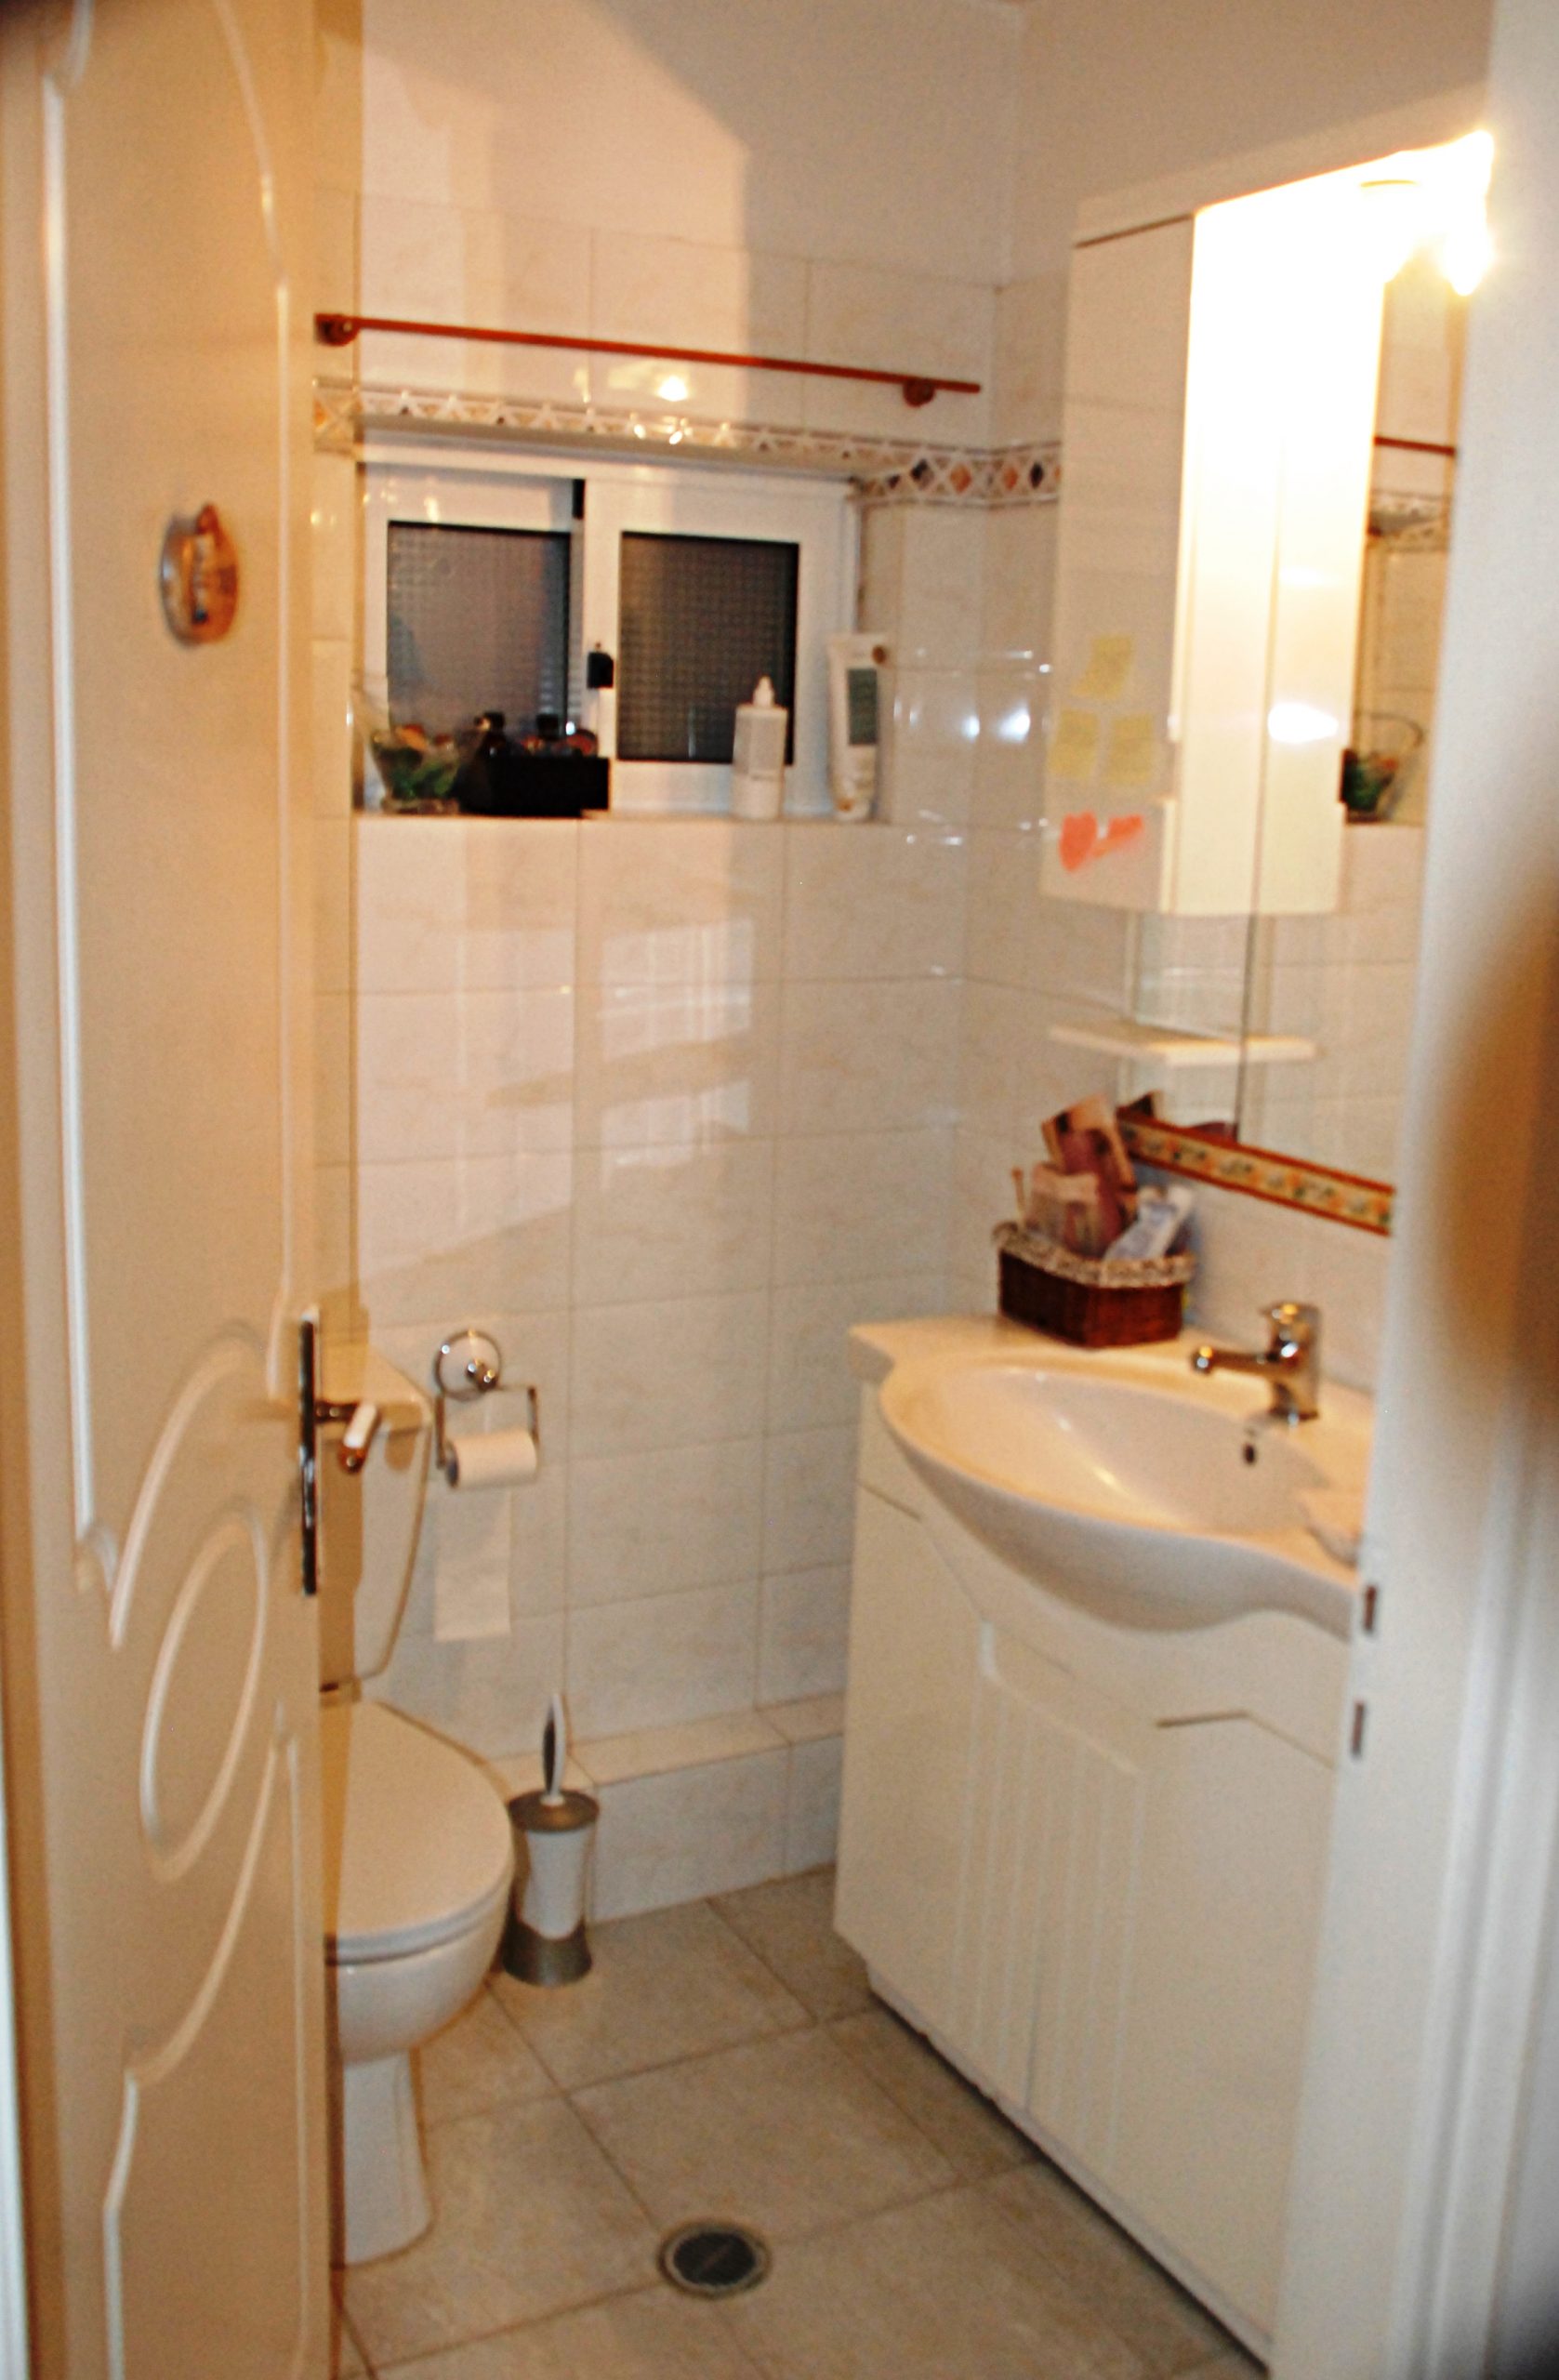 Bathroom of house for sale in Patra Greece, Patra